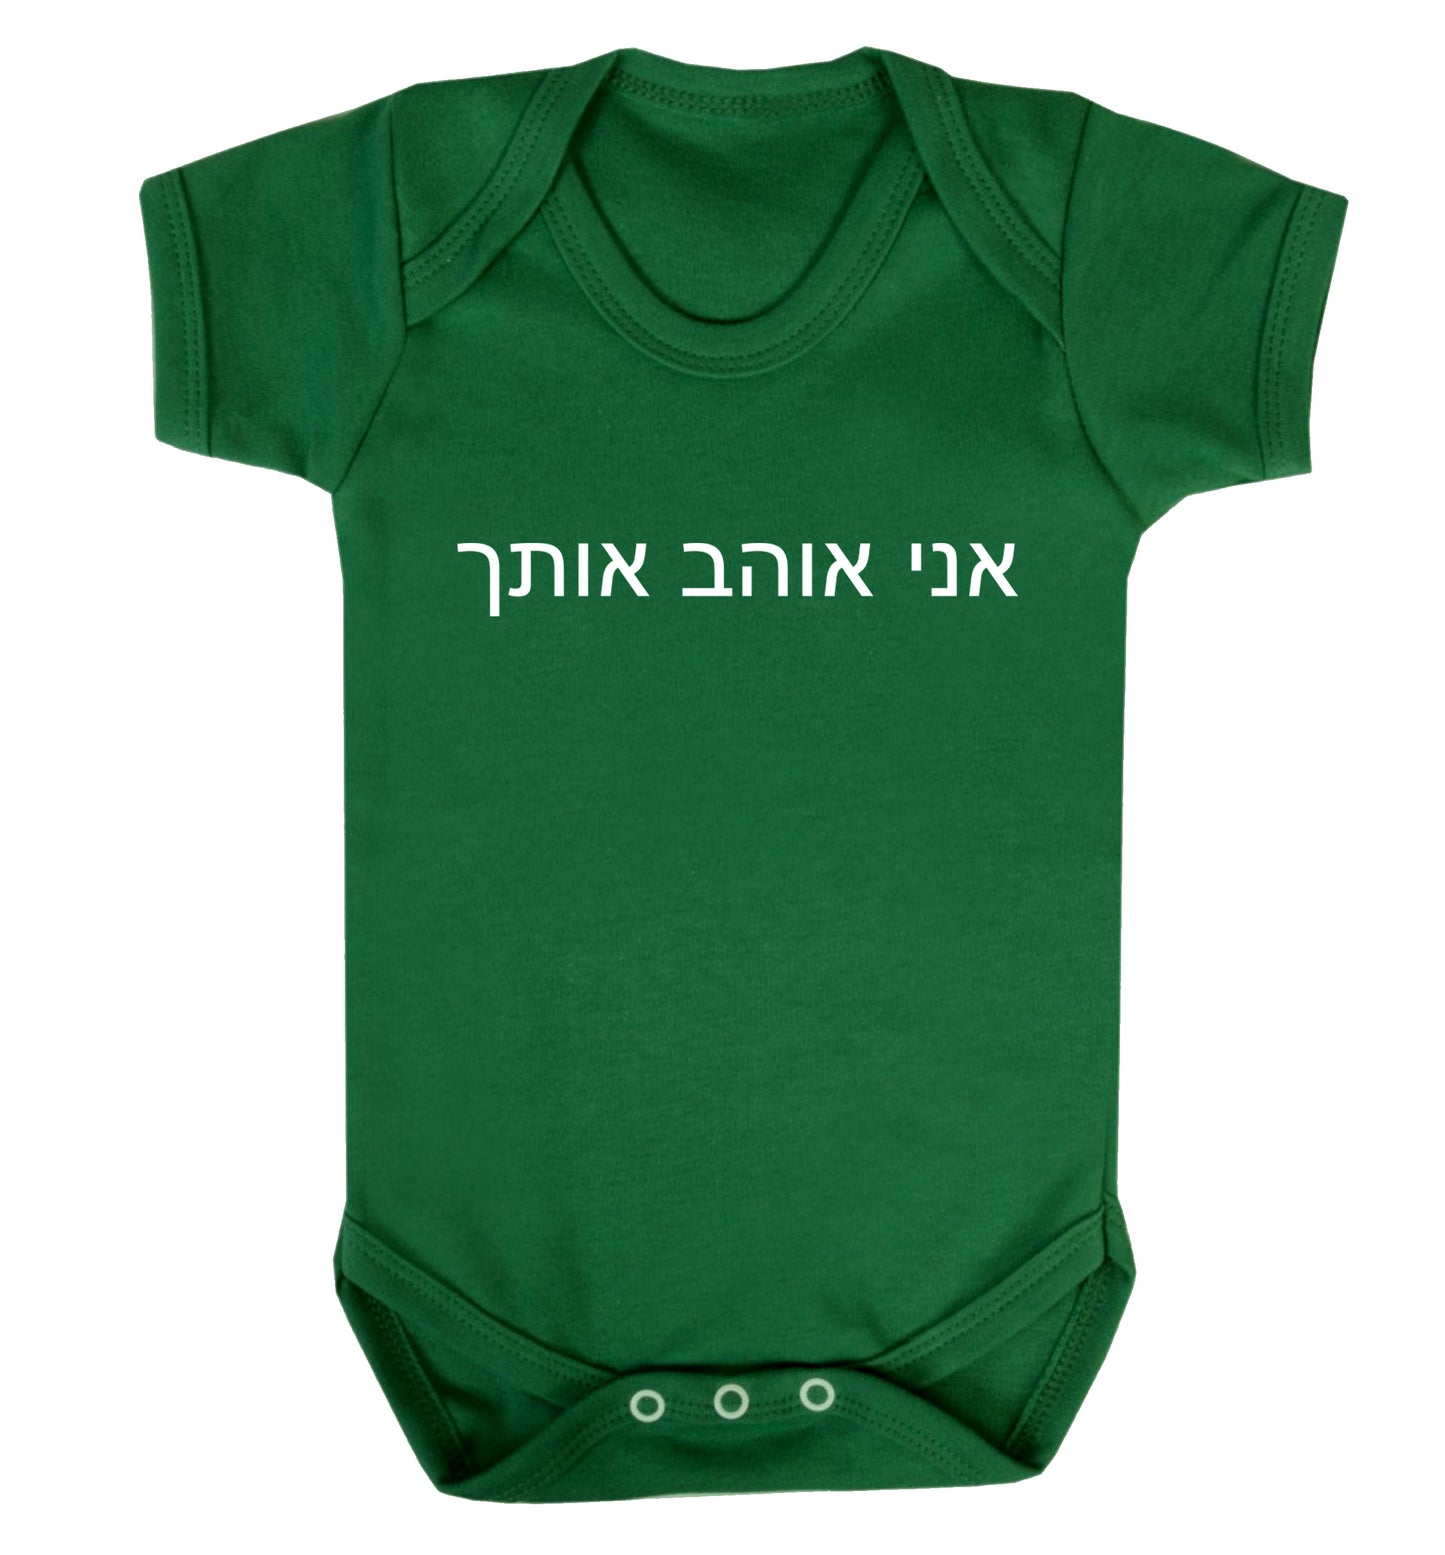 ___ ____ ____ - I love you Baby Vest green 18-24 months